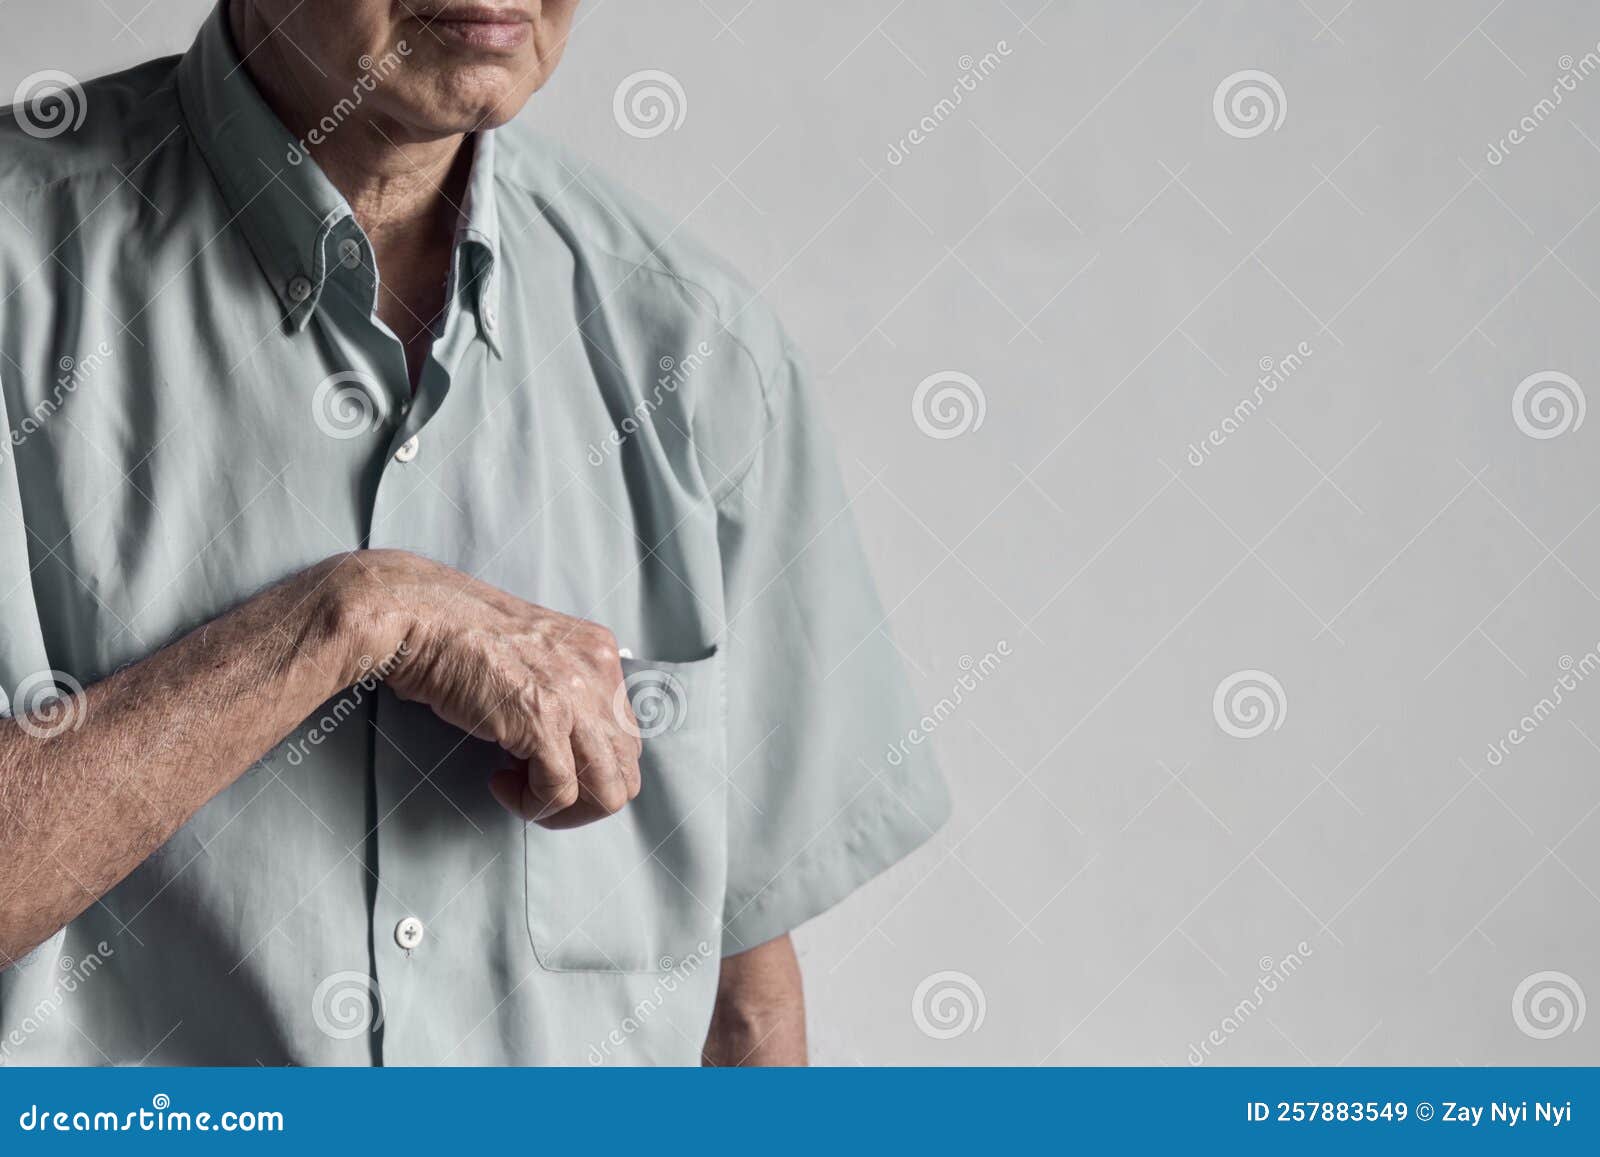 hand muscle rigidity and finger flexion of asian man